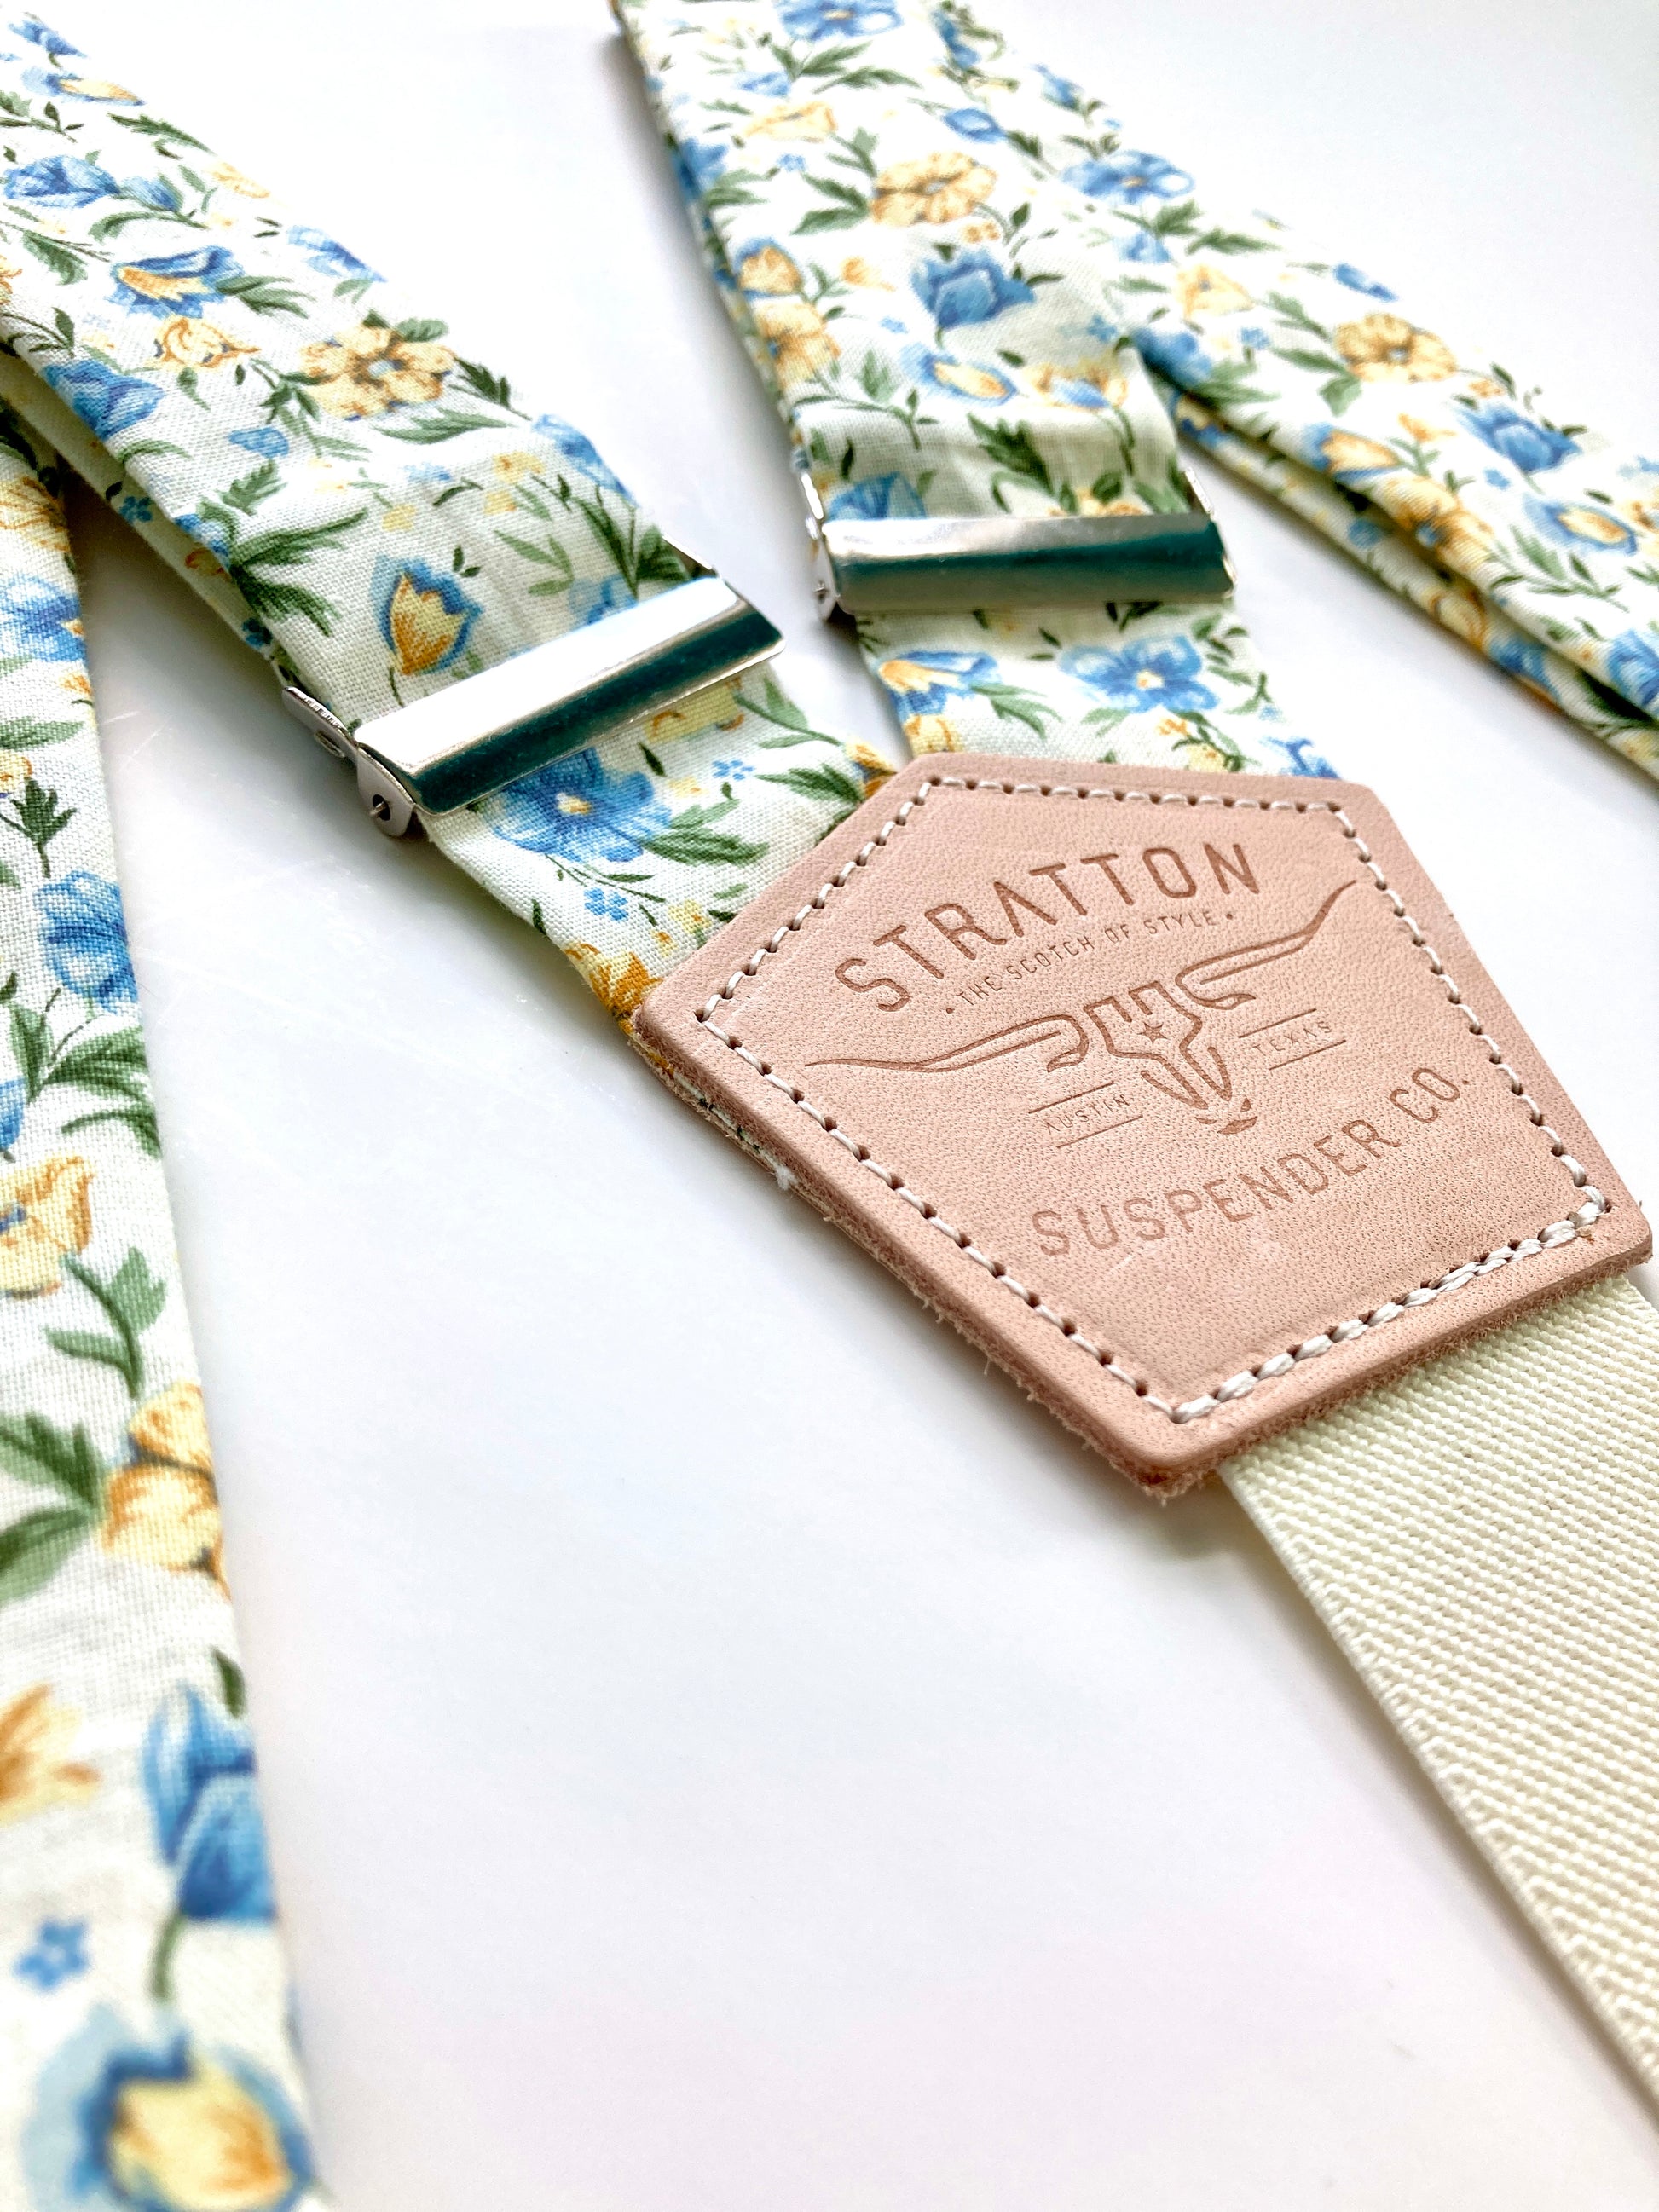 Stratton Suspenders Cream Floral Straps of the Limited Edition 1880 Vintage Collection